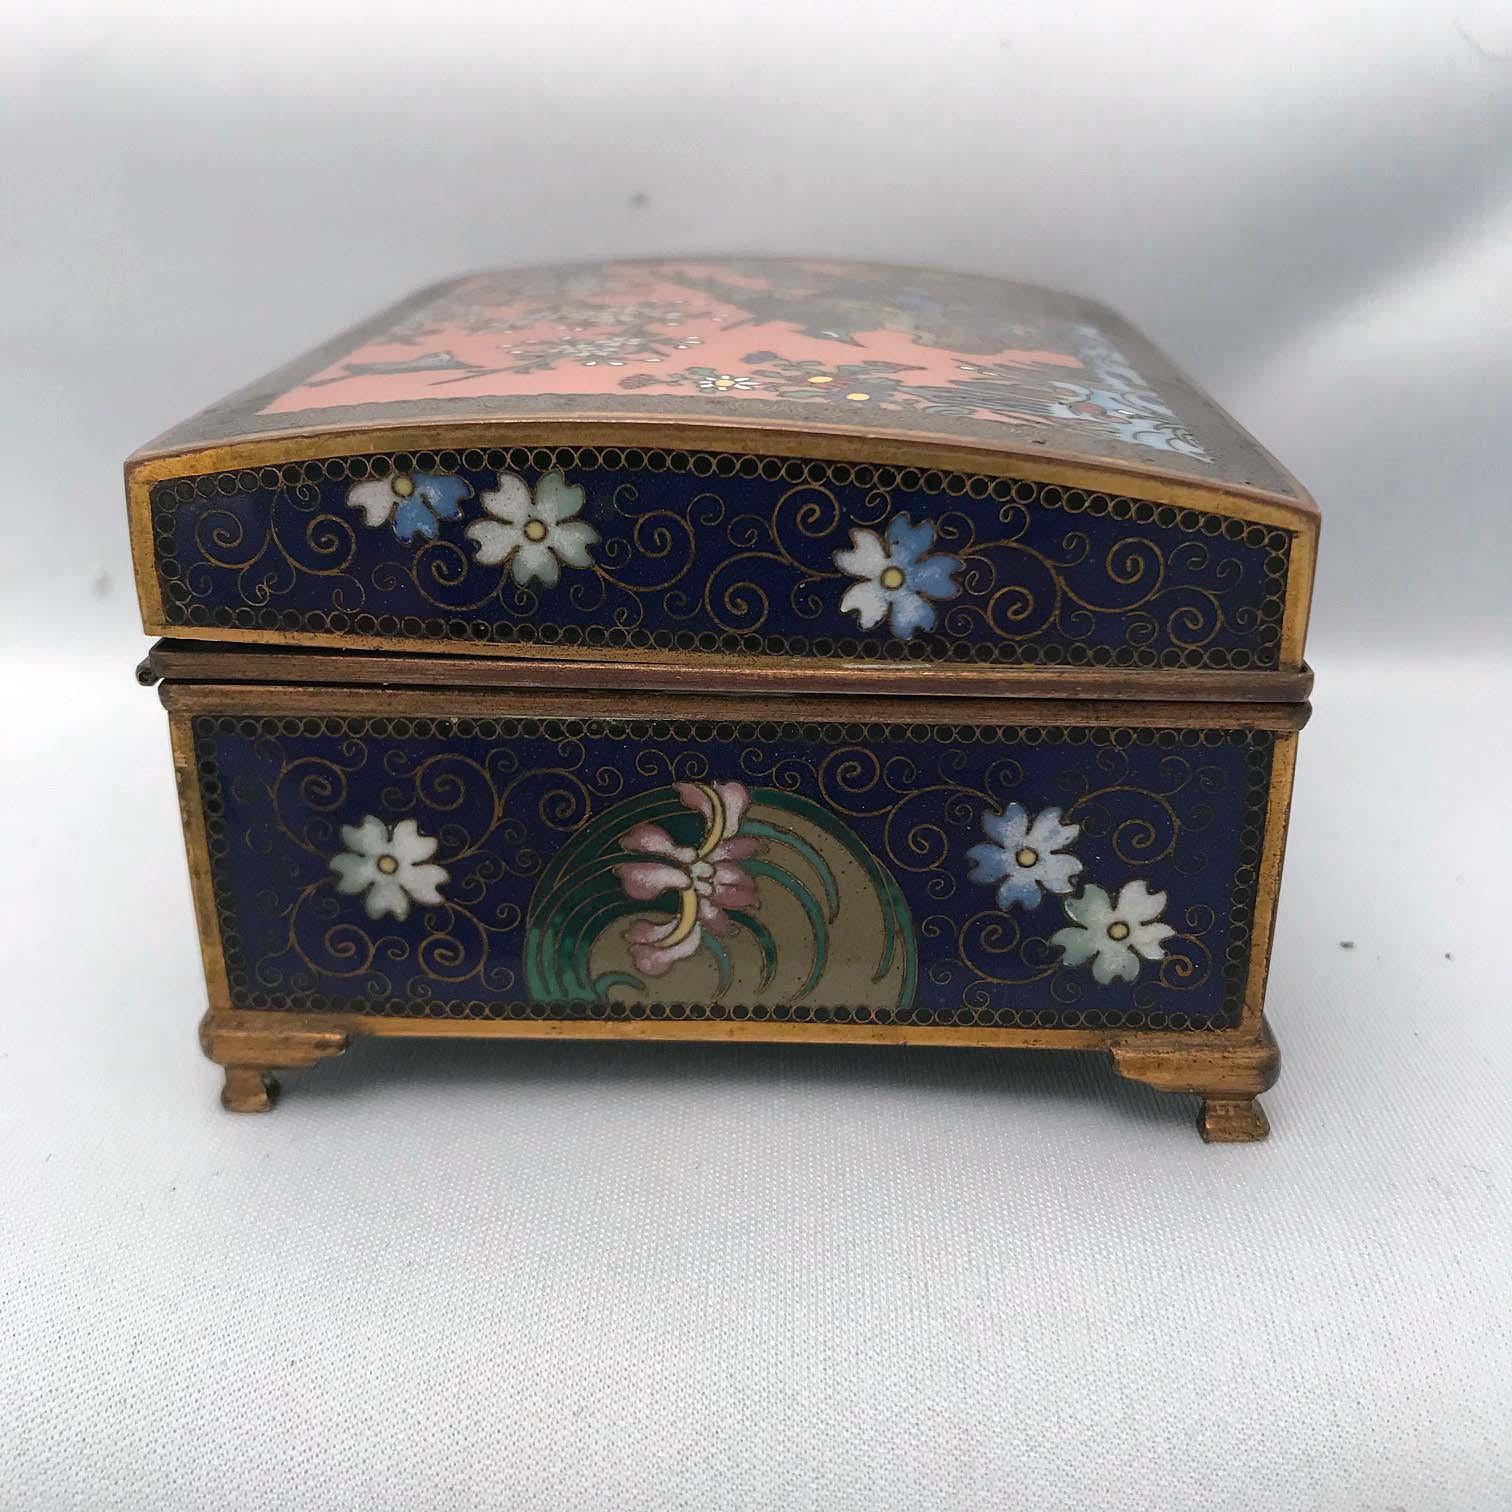 Meiji Japanese Cloisonné Box with Birds and Flowers